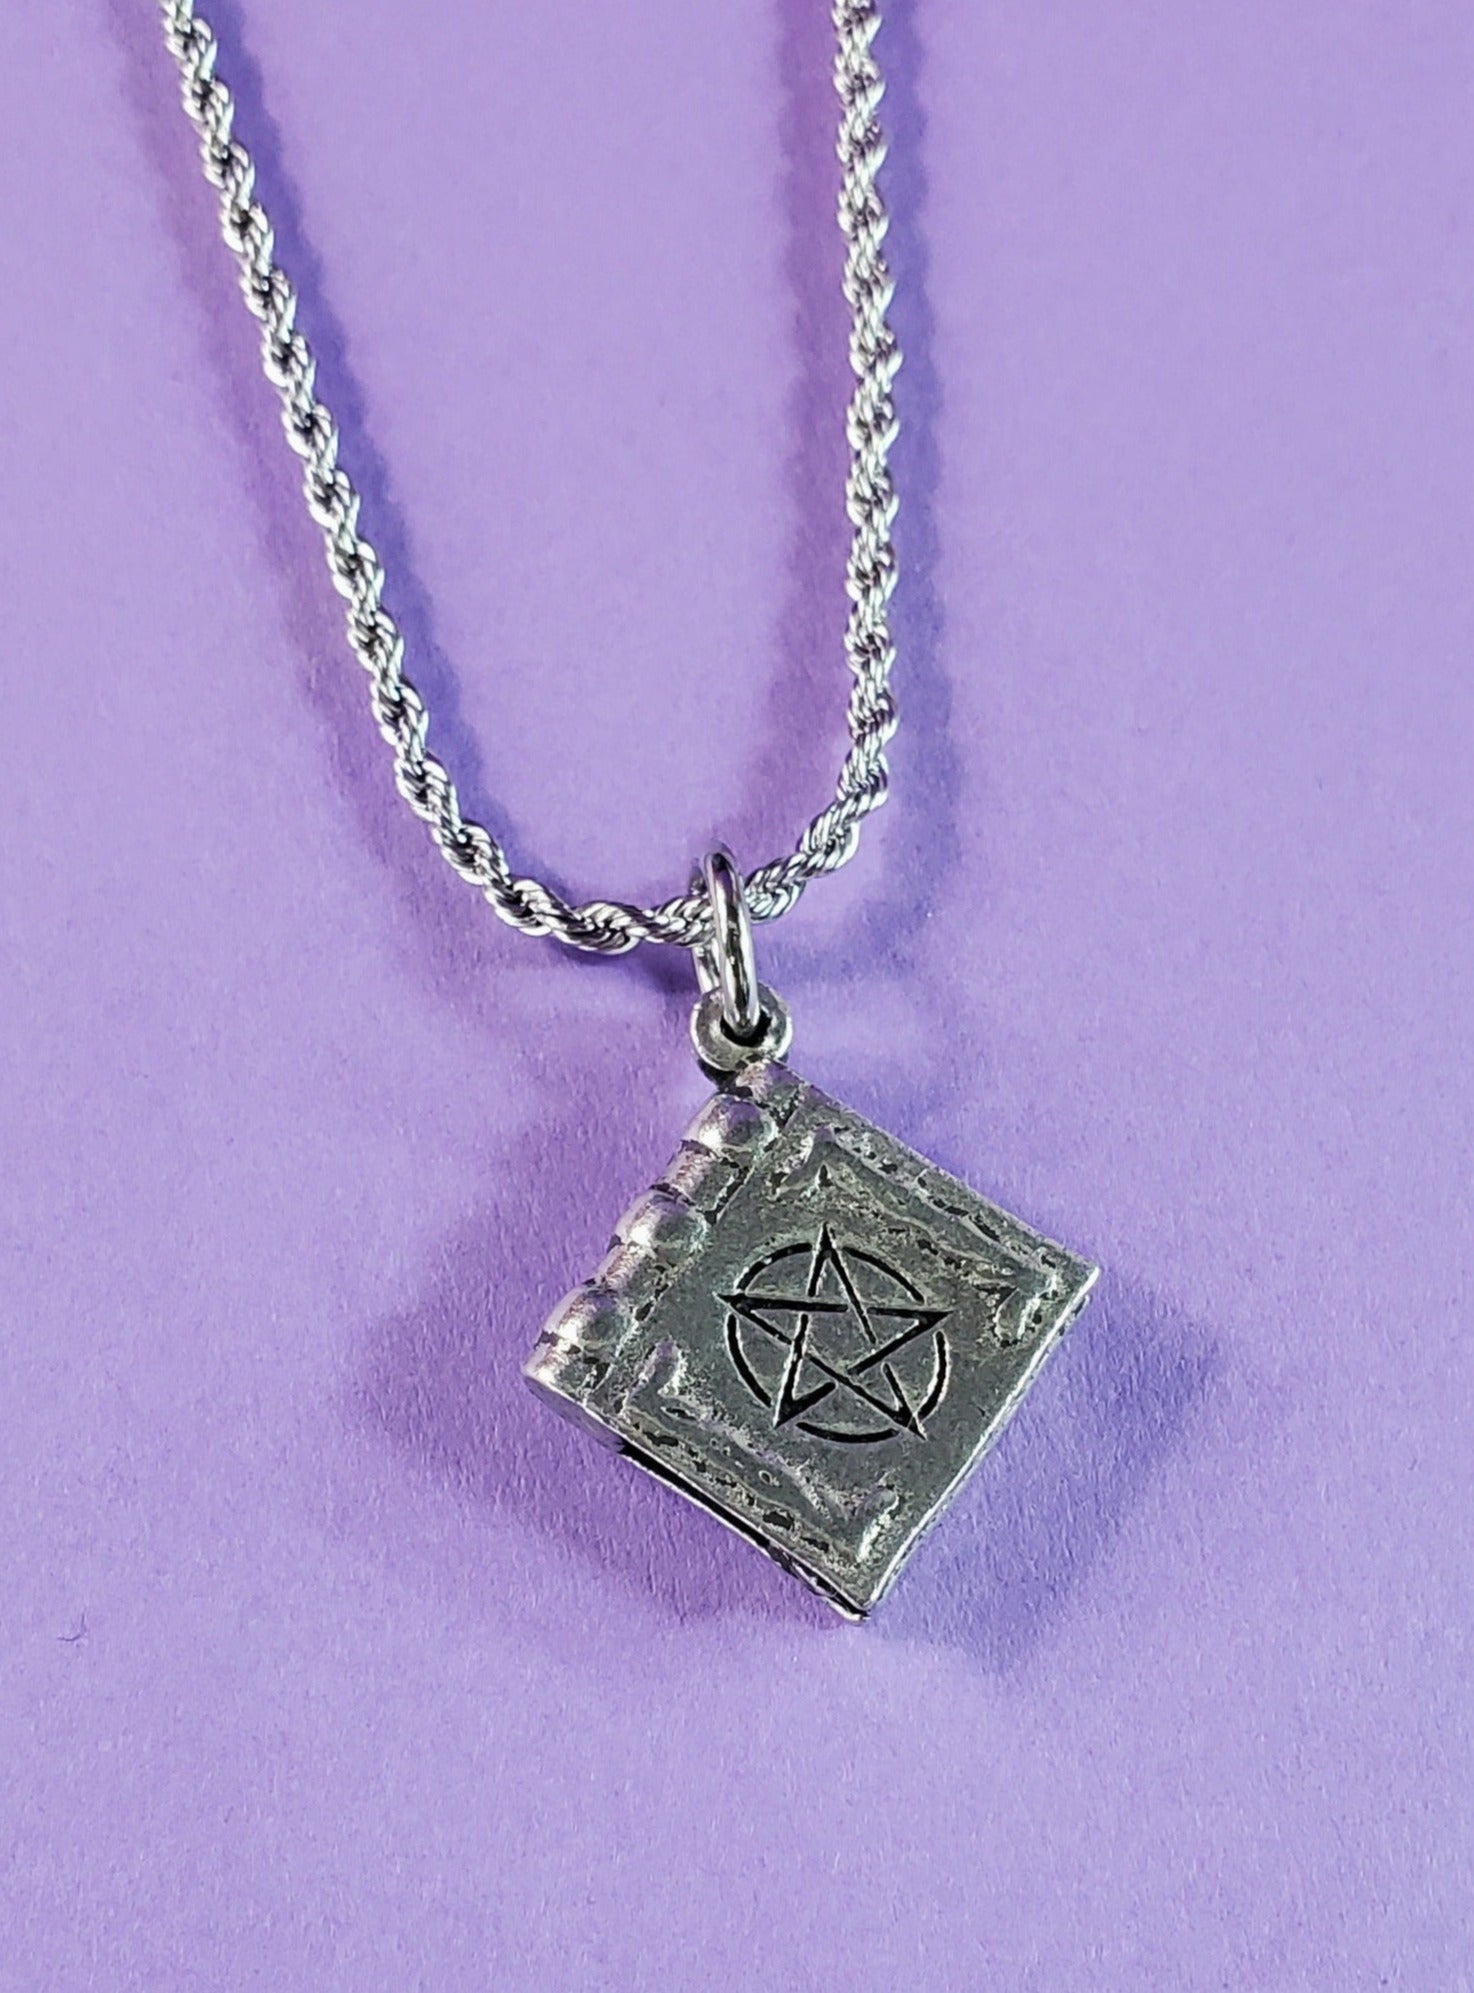 American pewter charm shaped like an ancient book of spells with a large pentagram on the front. Hanging on a stainless steel rope chain. Shown from the front